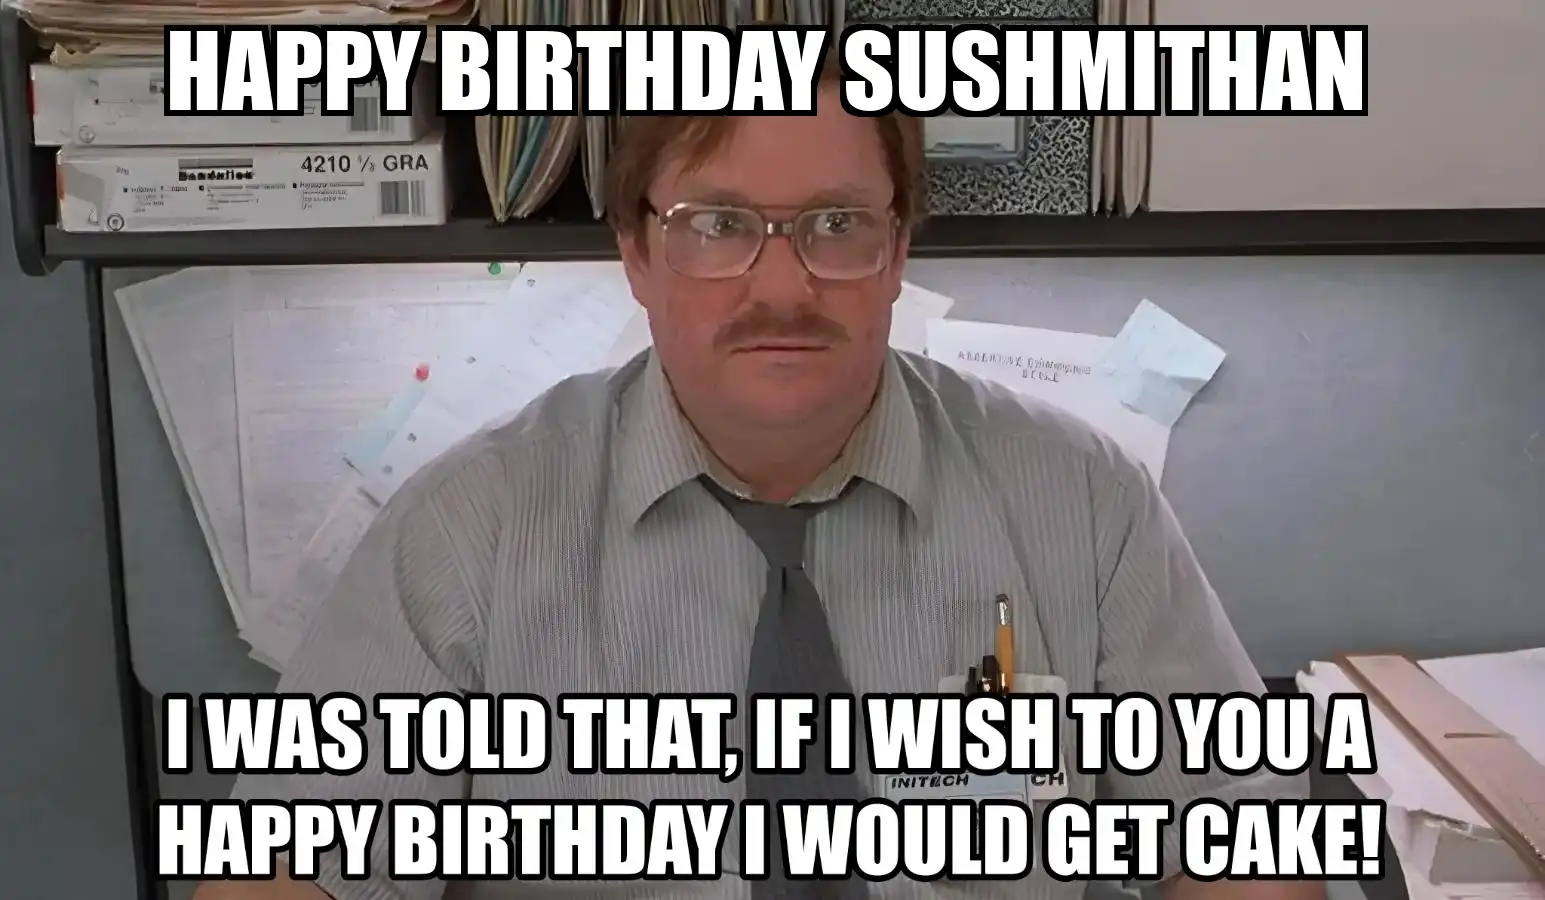 Happy Birthday Sushmithan I Would Get A Cake Meme